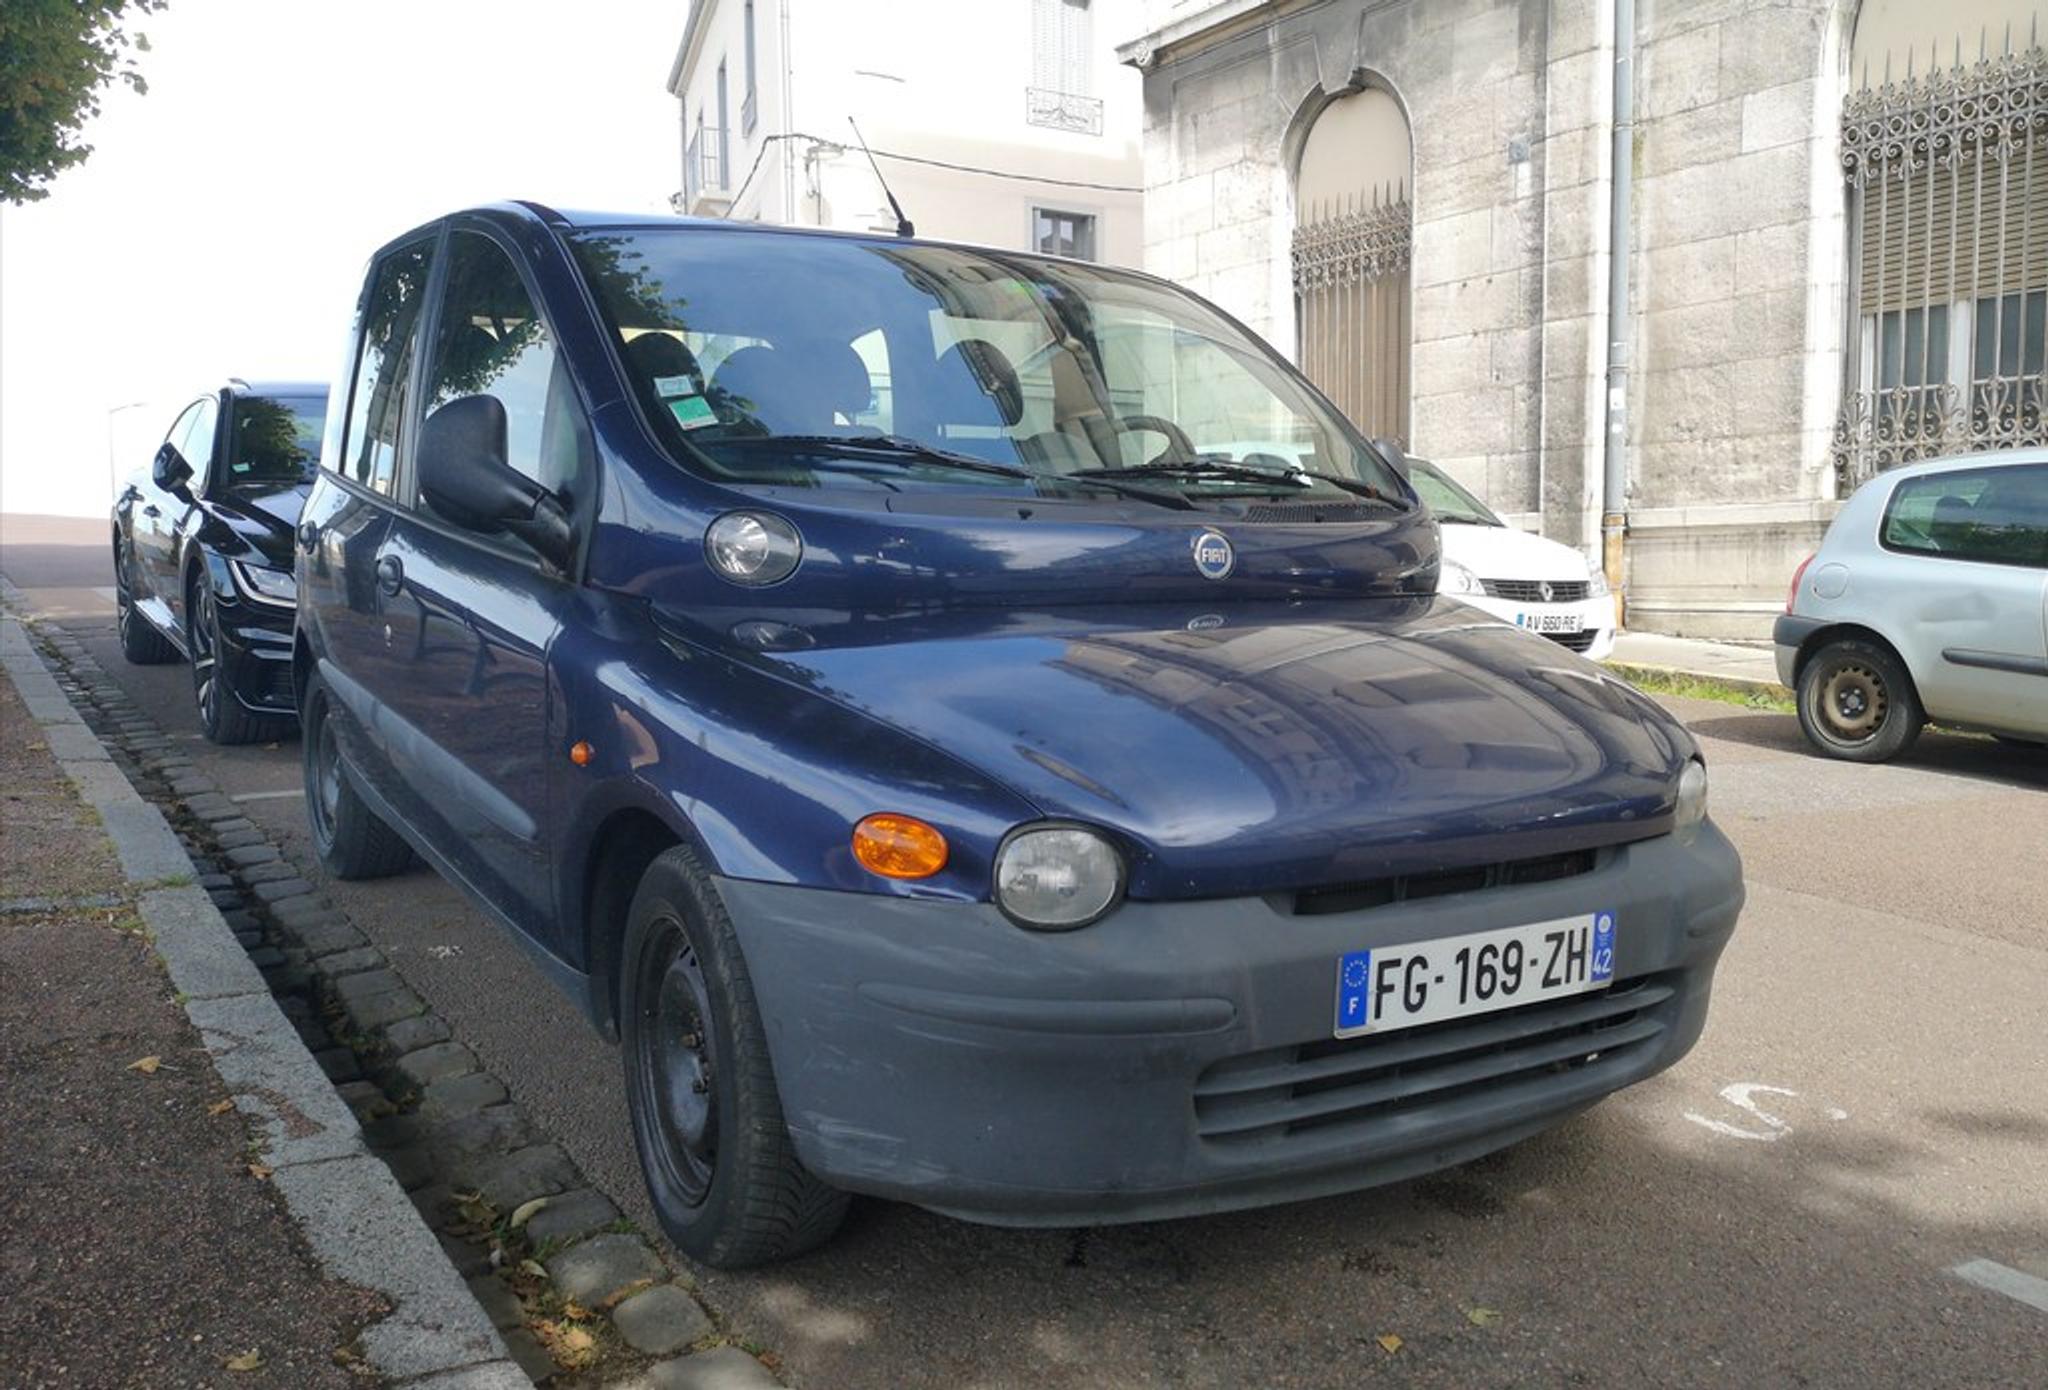 Dark blue Fiat Multiple with black bumpers